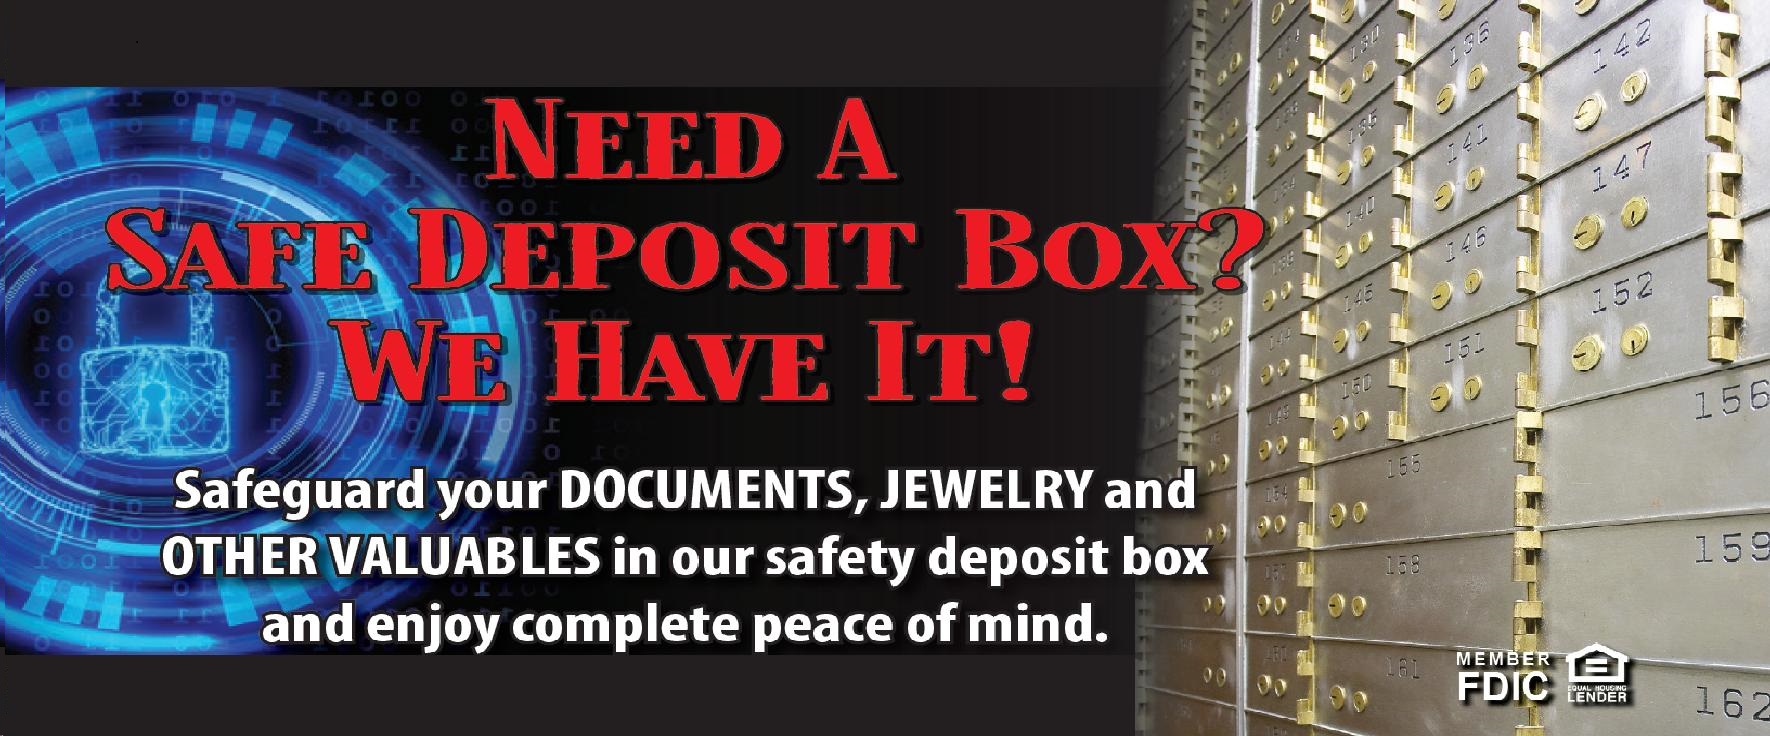 Why have a safe deposit box?